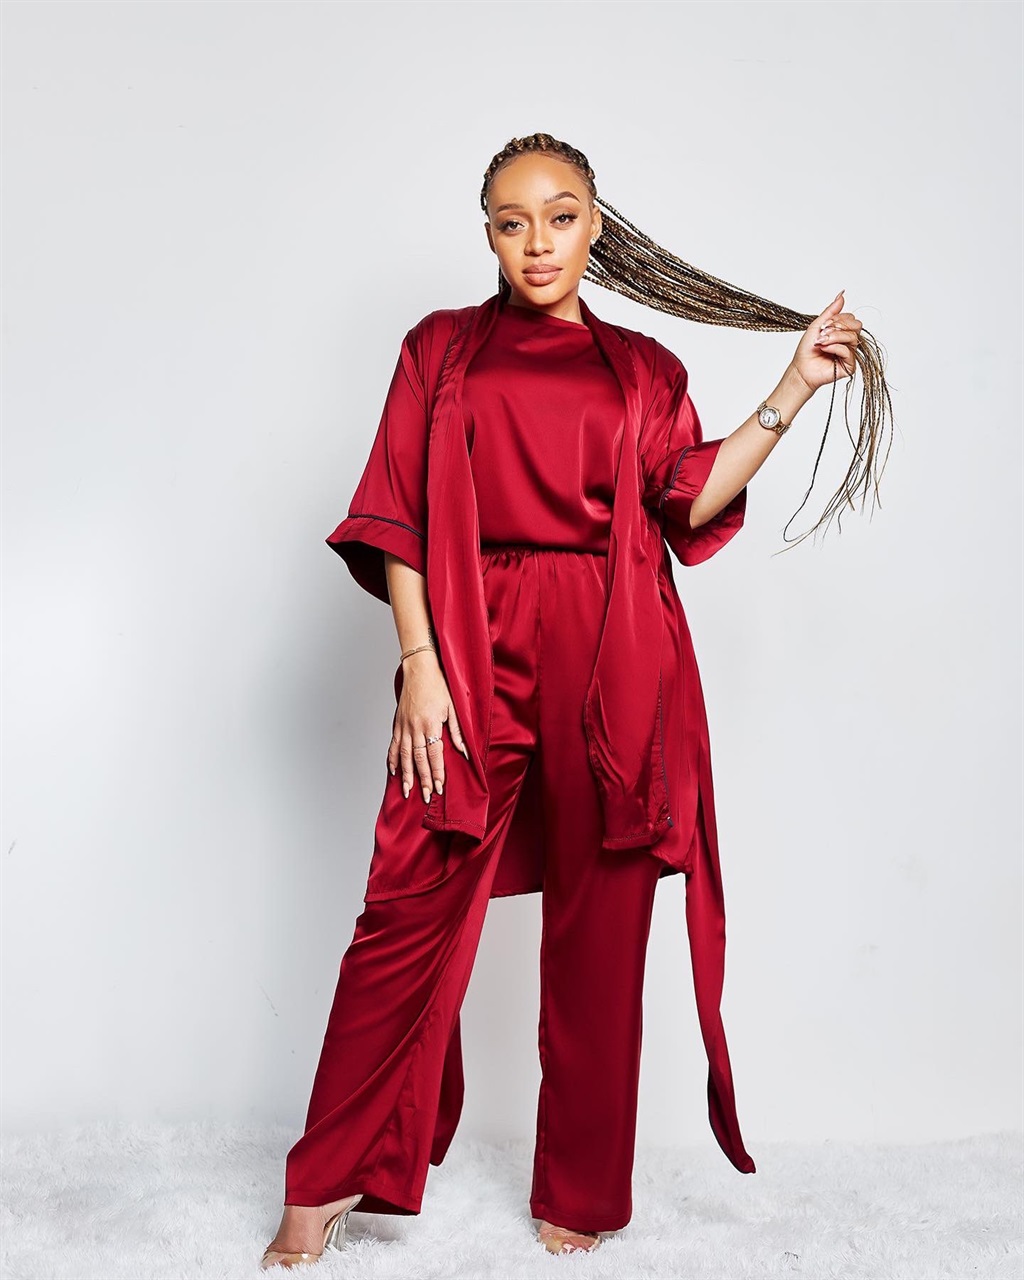 Thando Thabethe is unstoppable.